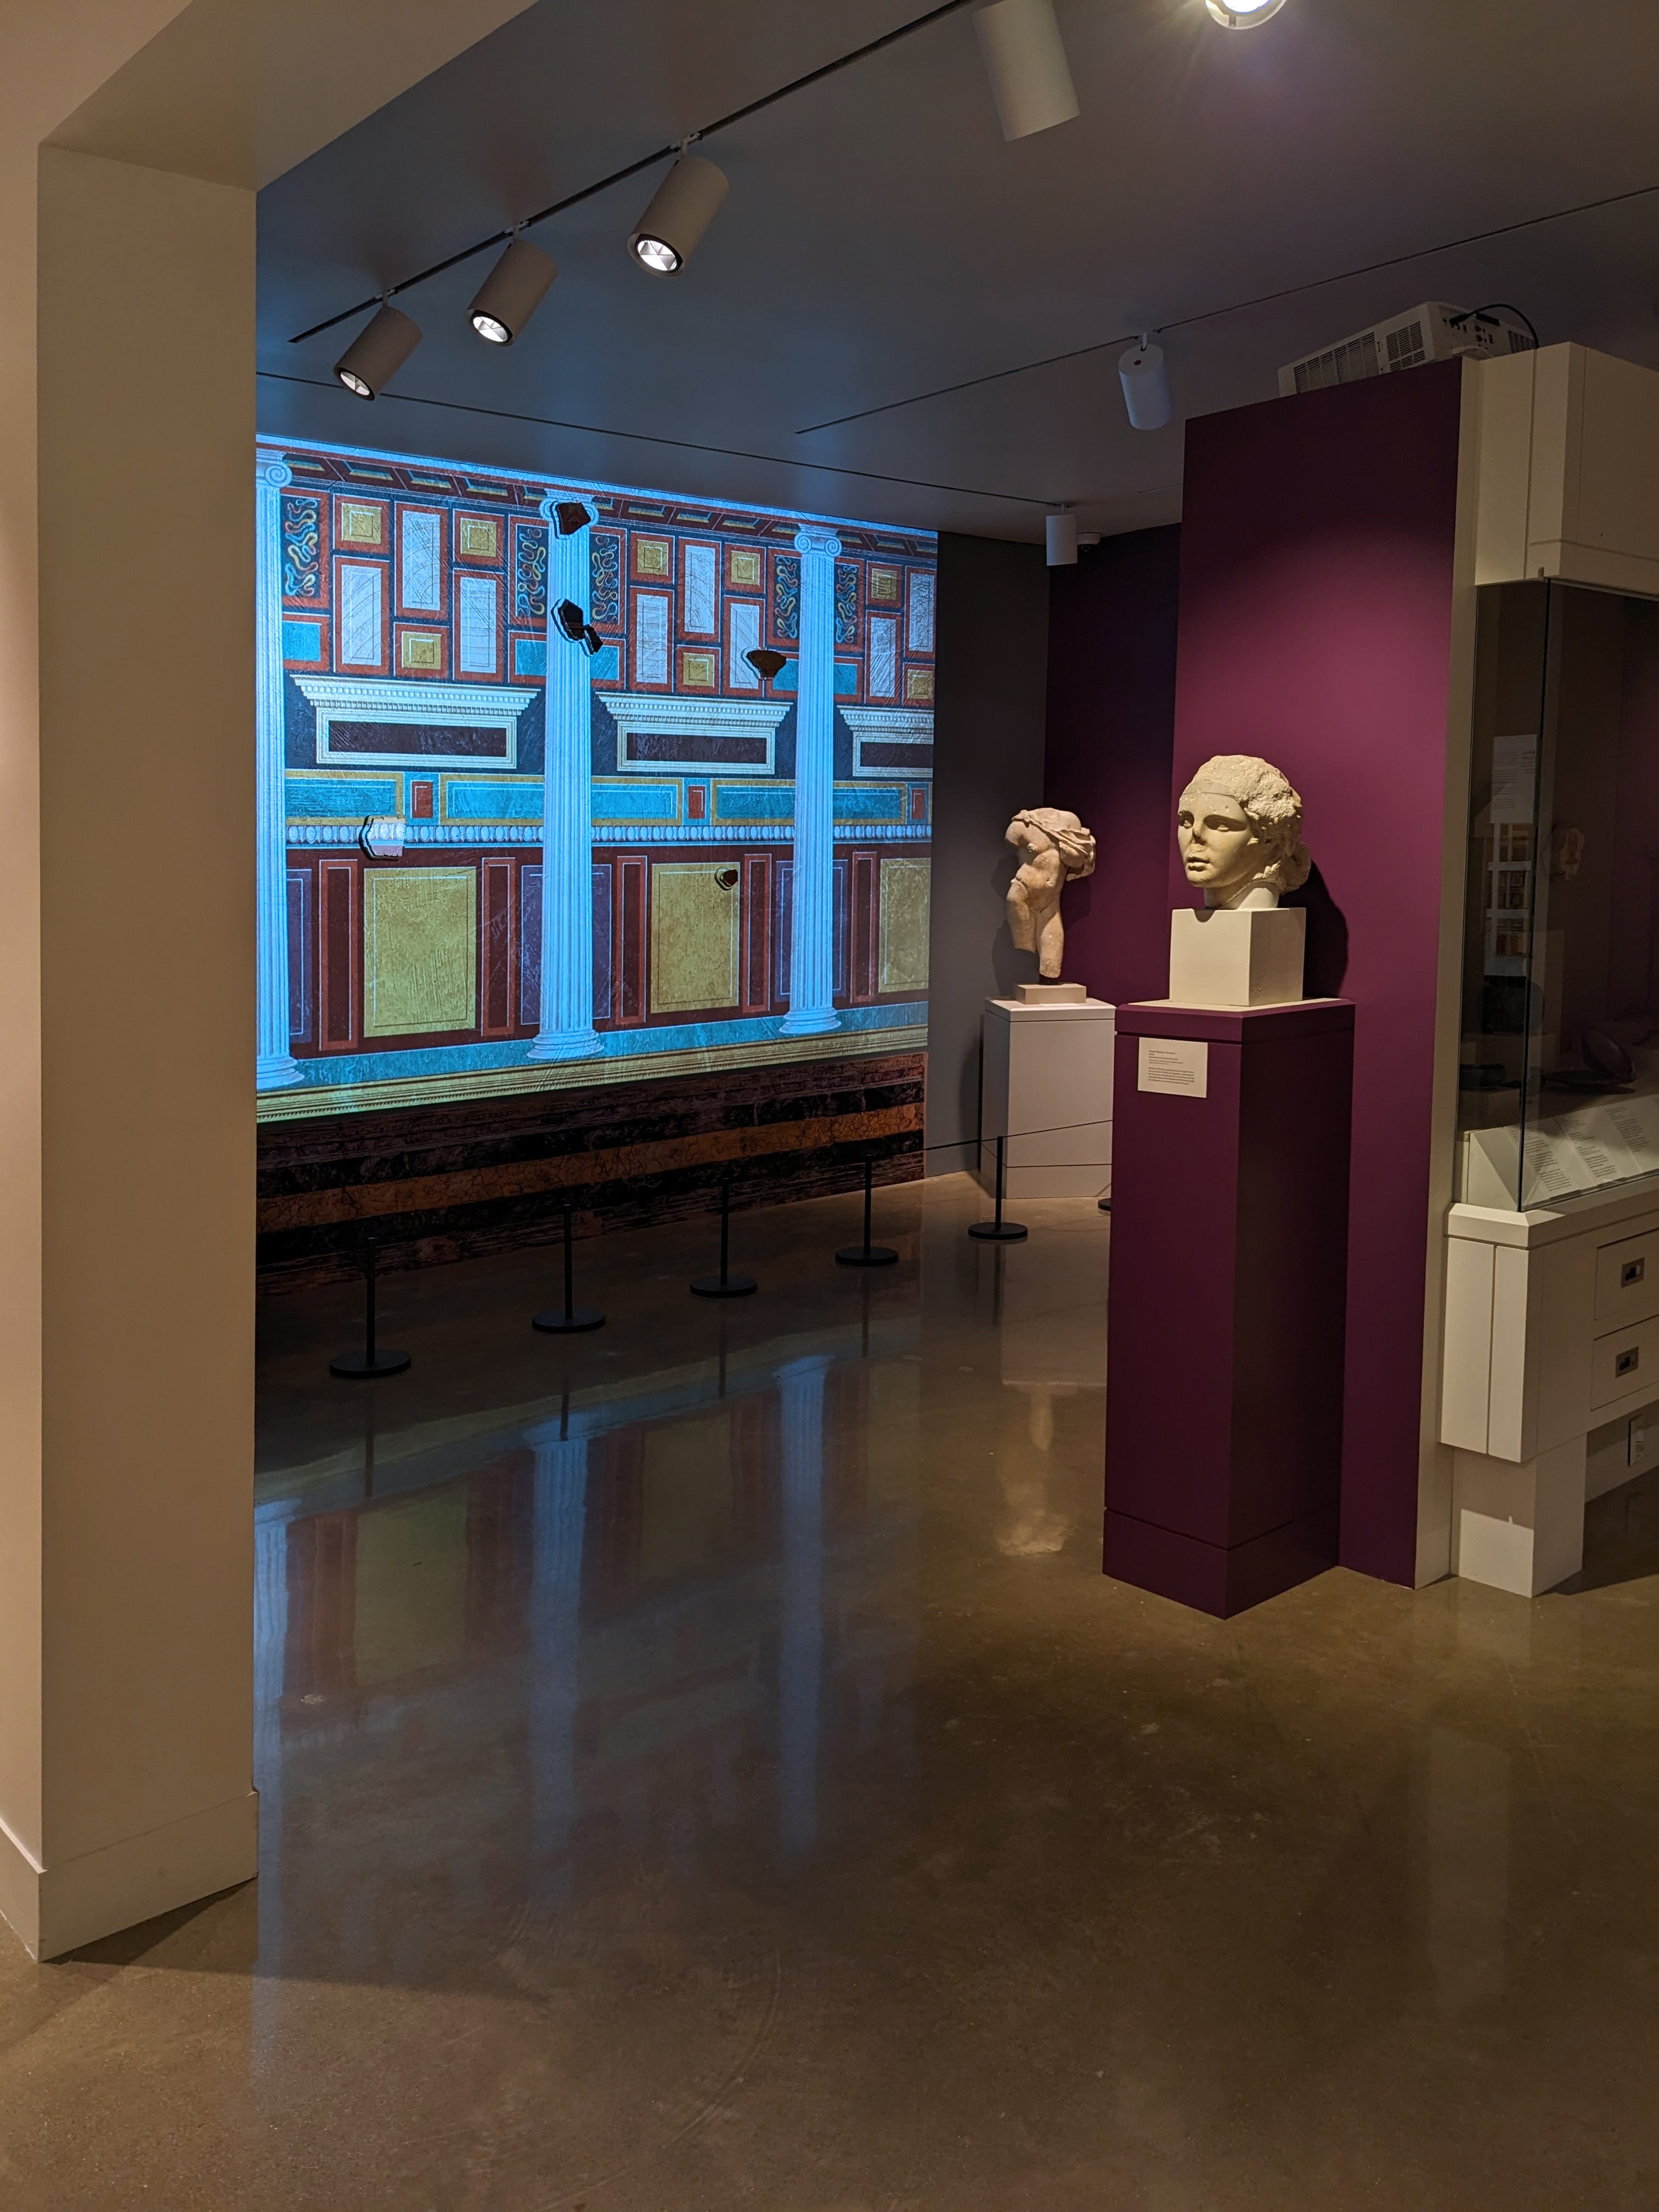 View into the Kelsey Museum’s Roman galleries. A large image of a Roman wall painting, featuring columns and other architectural elements, is projected onto the rear wall. White marble statues on pedestals are also visible in the gallery space. 